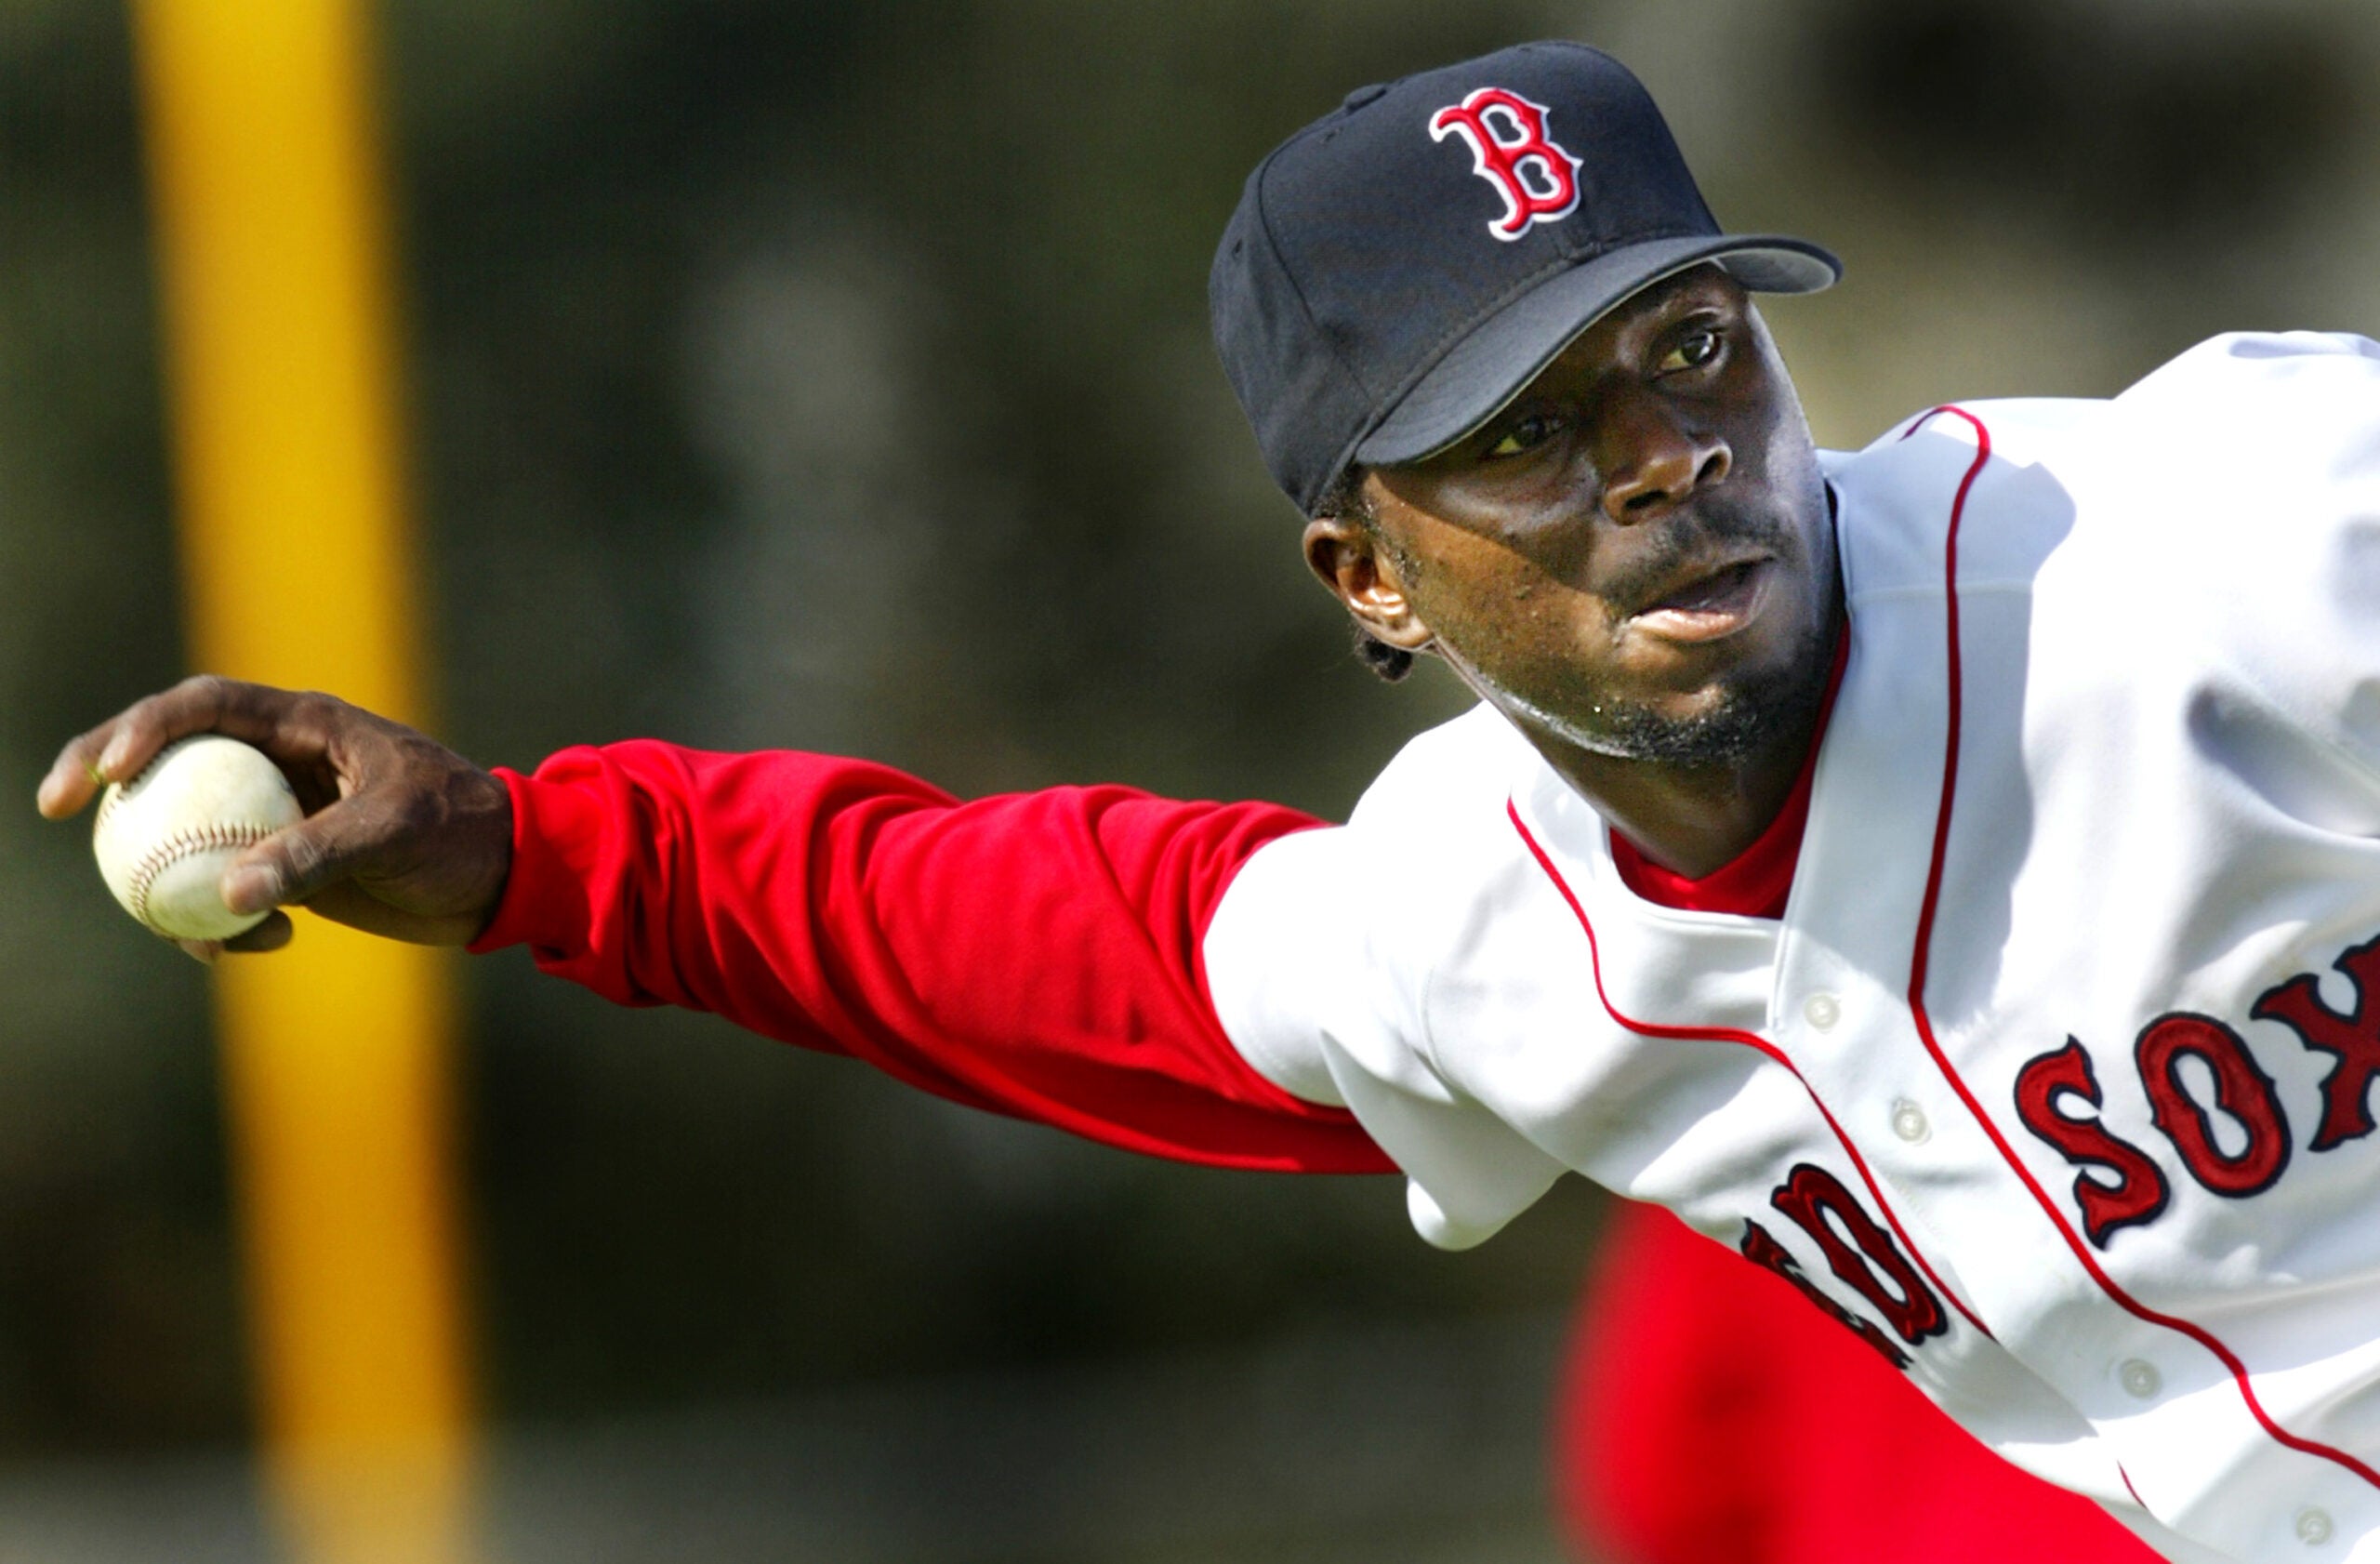 Boston Red Sox shortstop Pokey Reese has trouble tracking down a